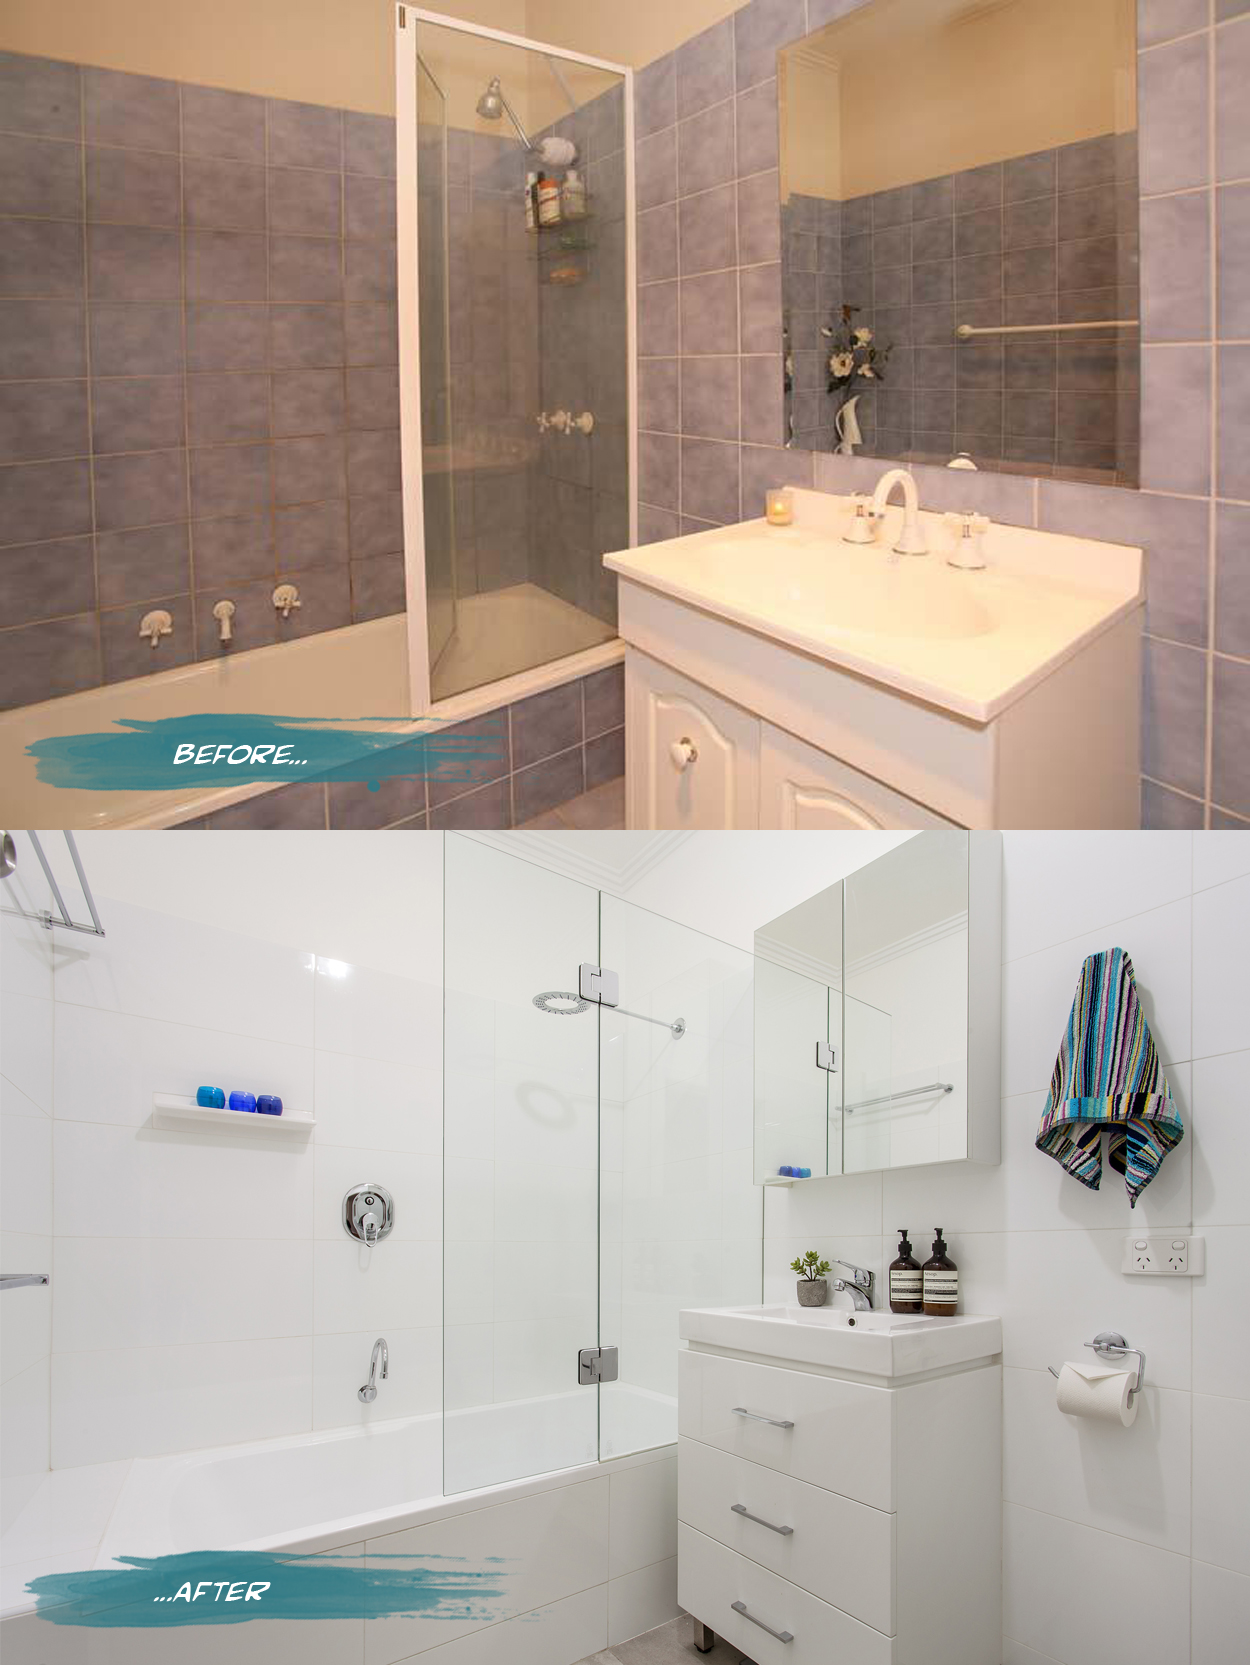 Bathroom before and after on Romona Sandon Designs blog. #interiors #beforeandafter #styling #home #bathroom